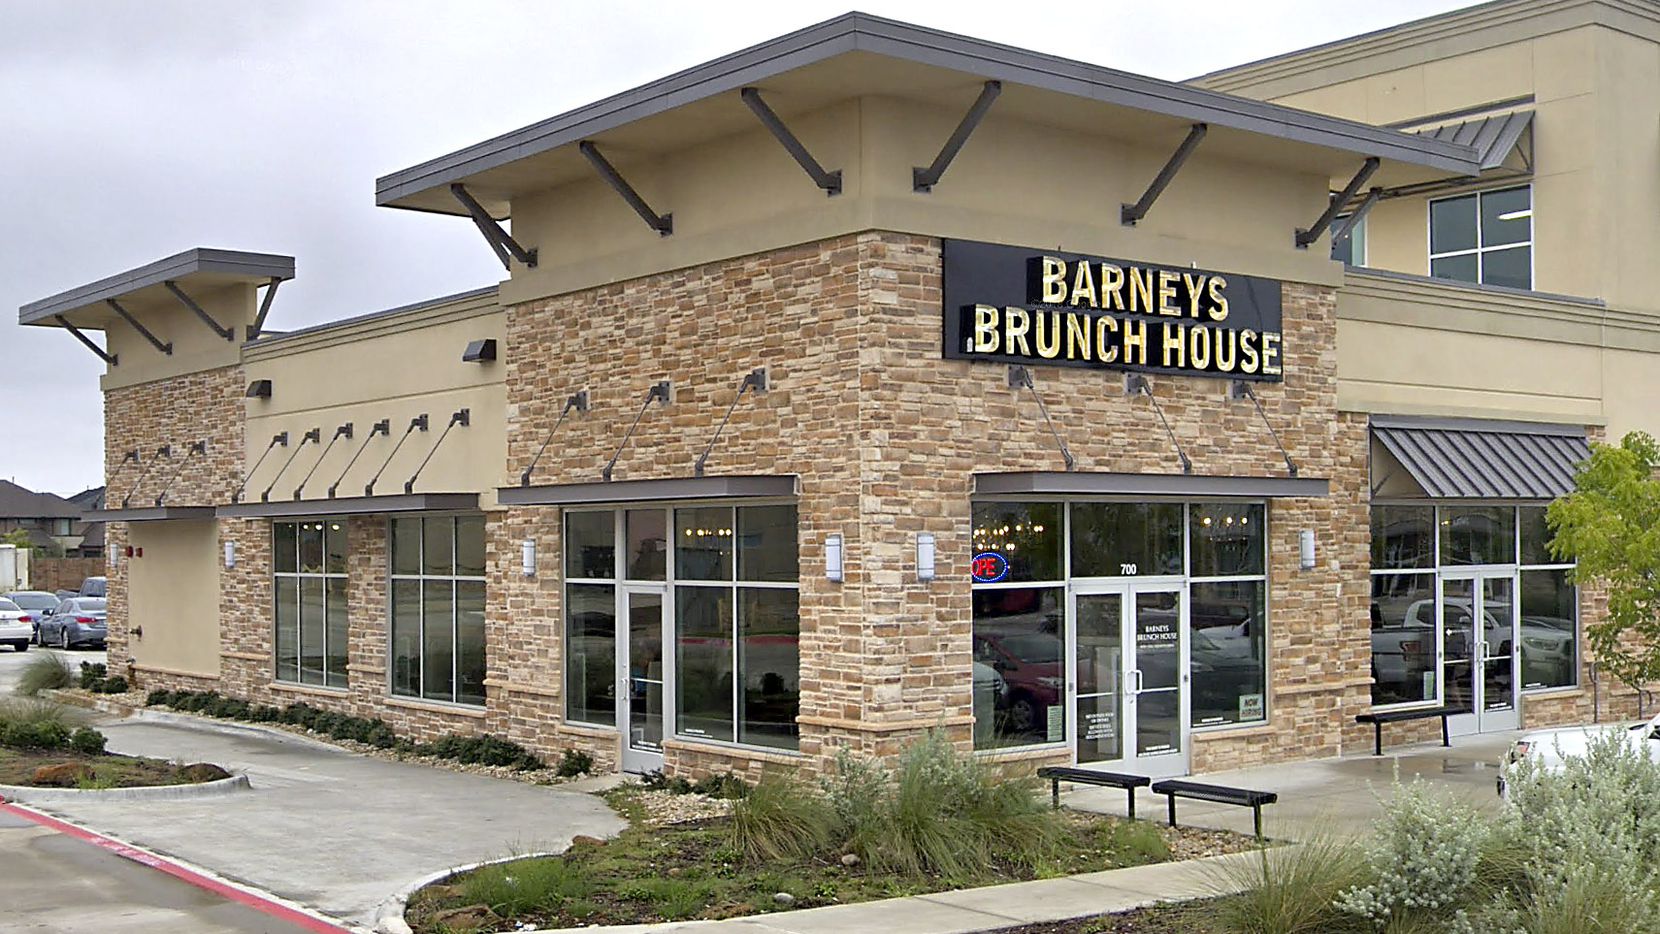 Barney's Brunch House in Frisco, Texas, shown on Google street view seen Friday, Feb. 14, 2020.